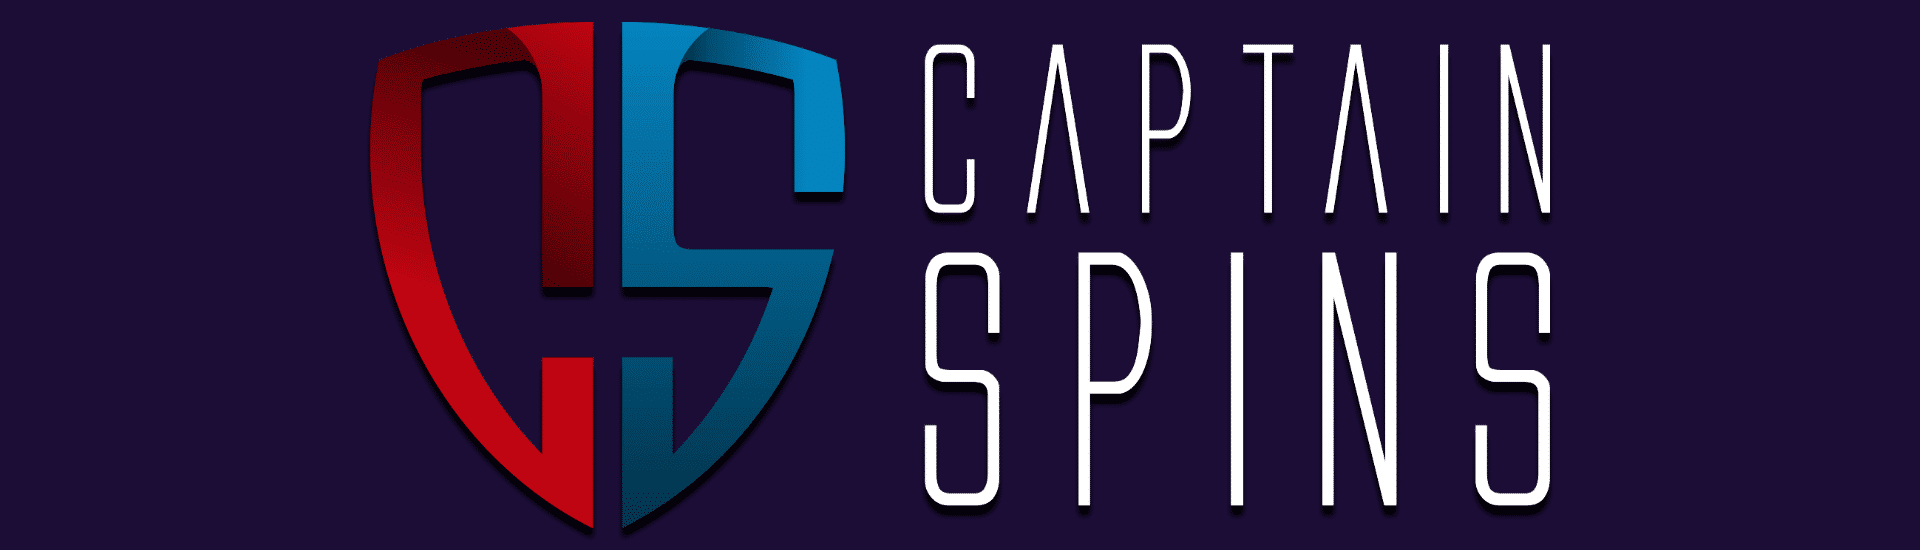 Captain Spins Featured Image